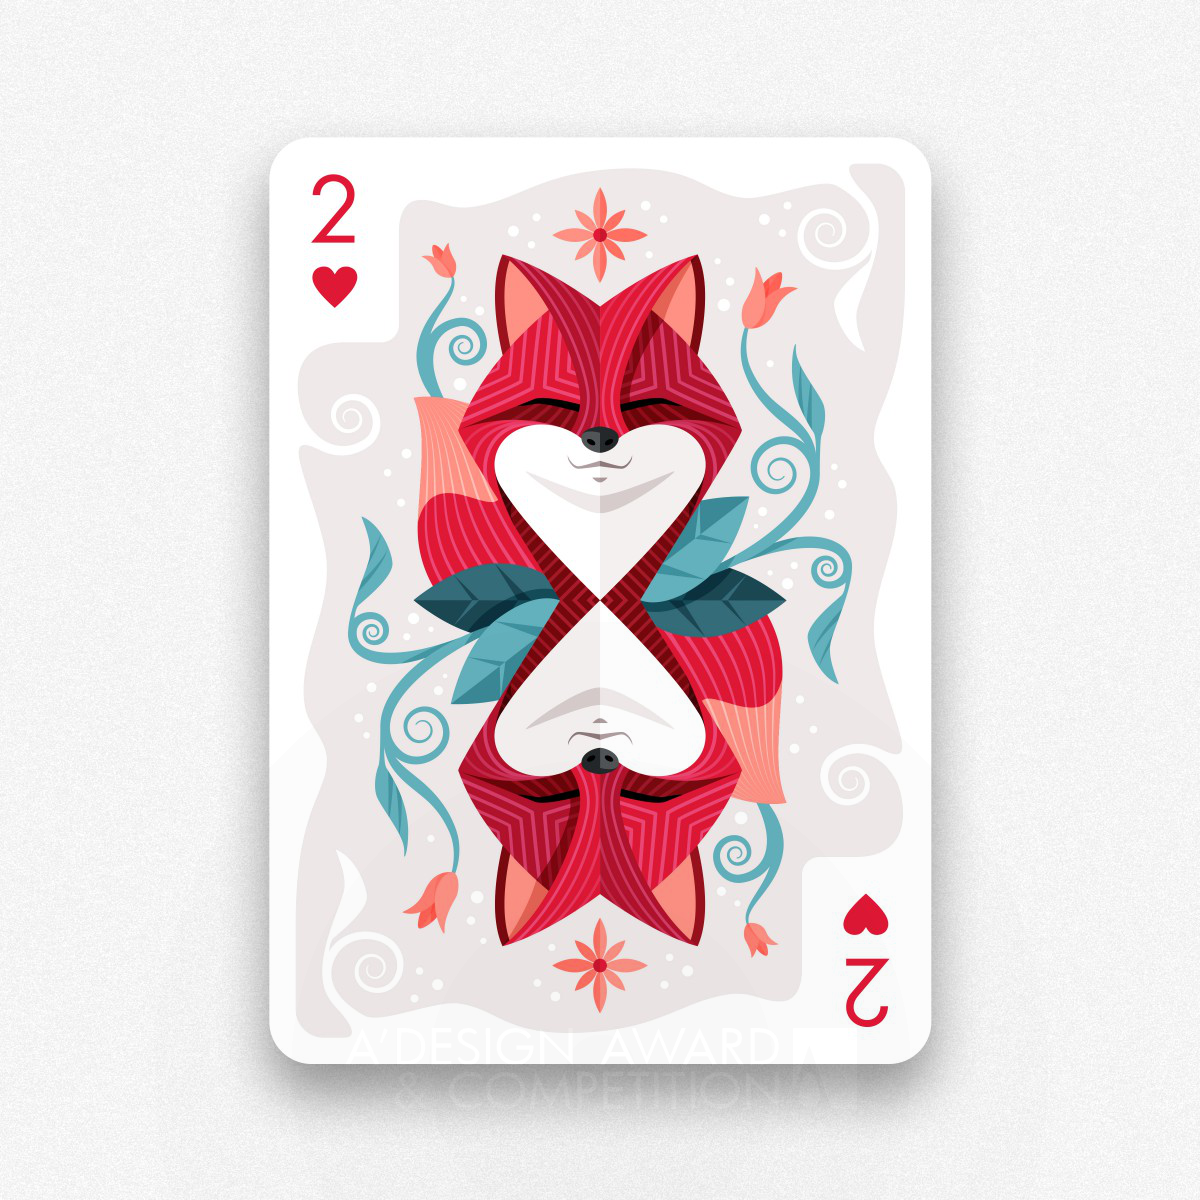 Two of Hearts Illustration